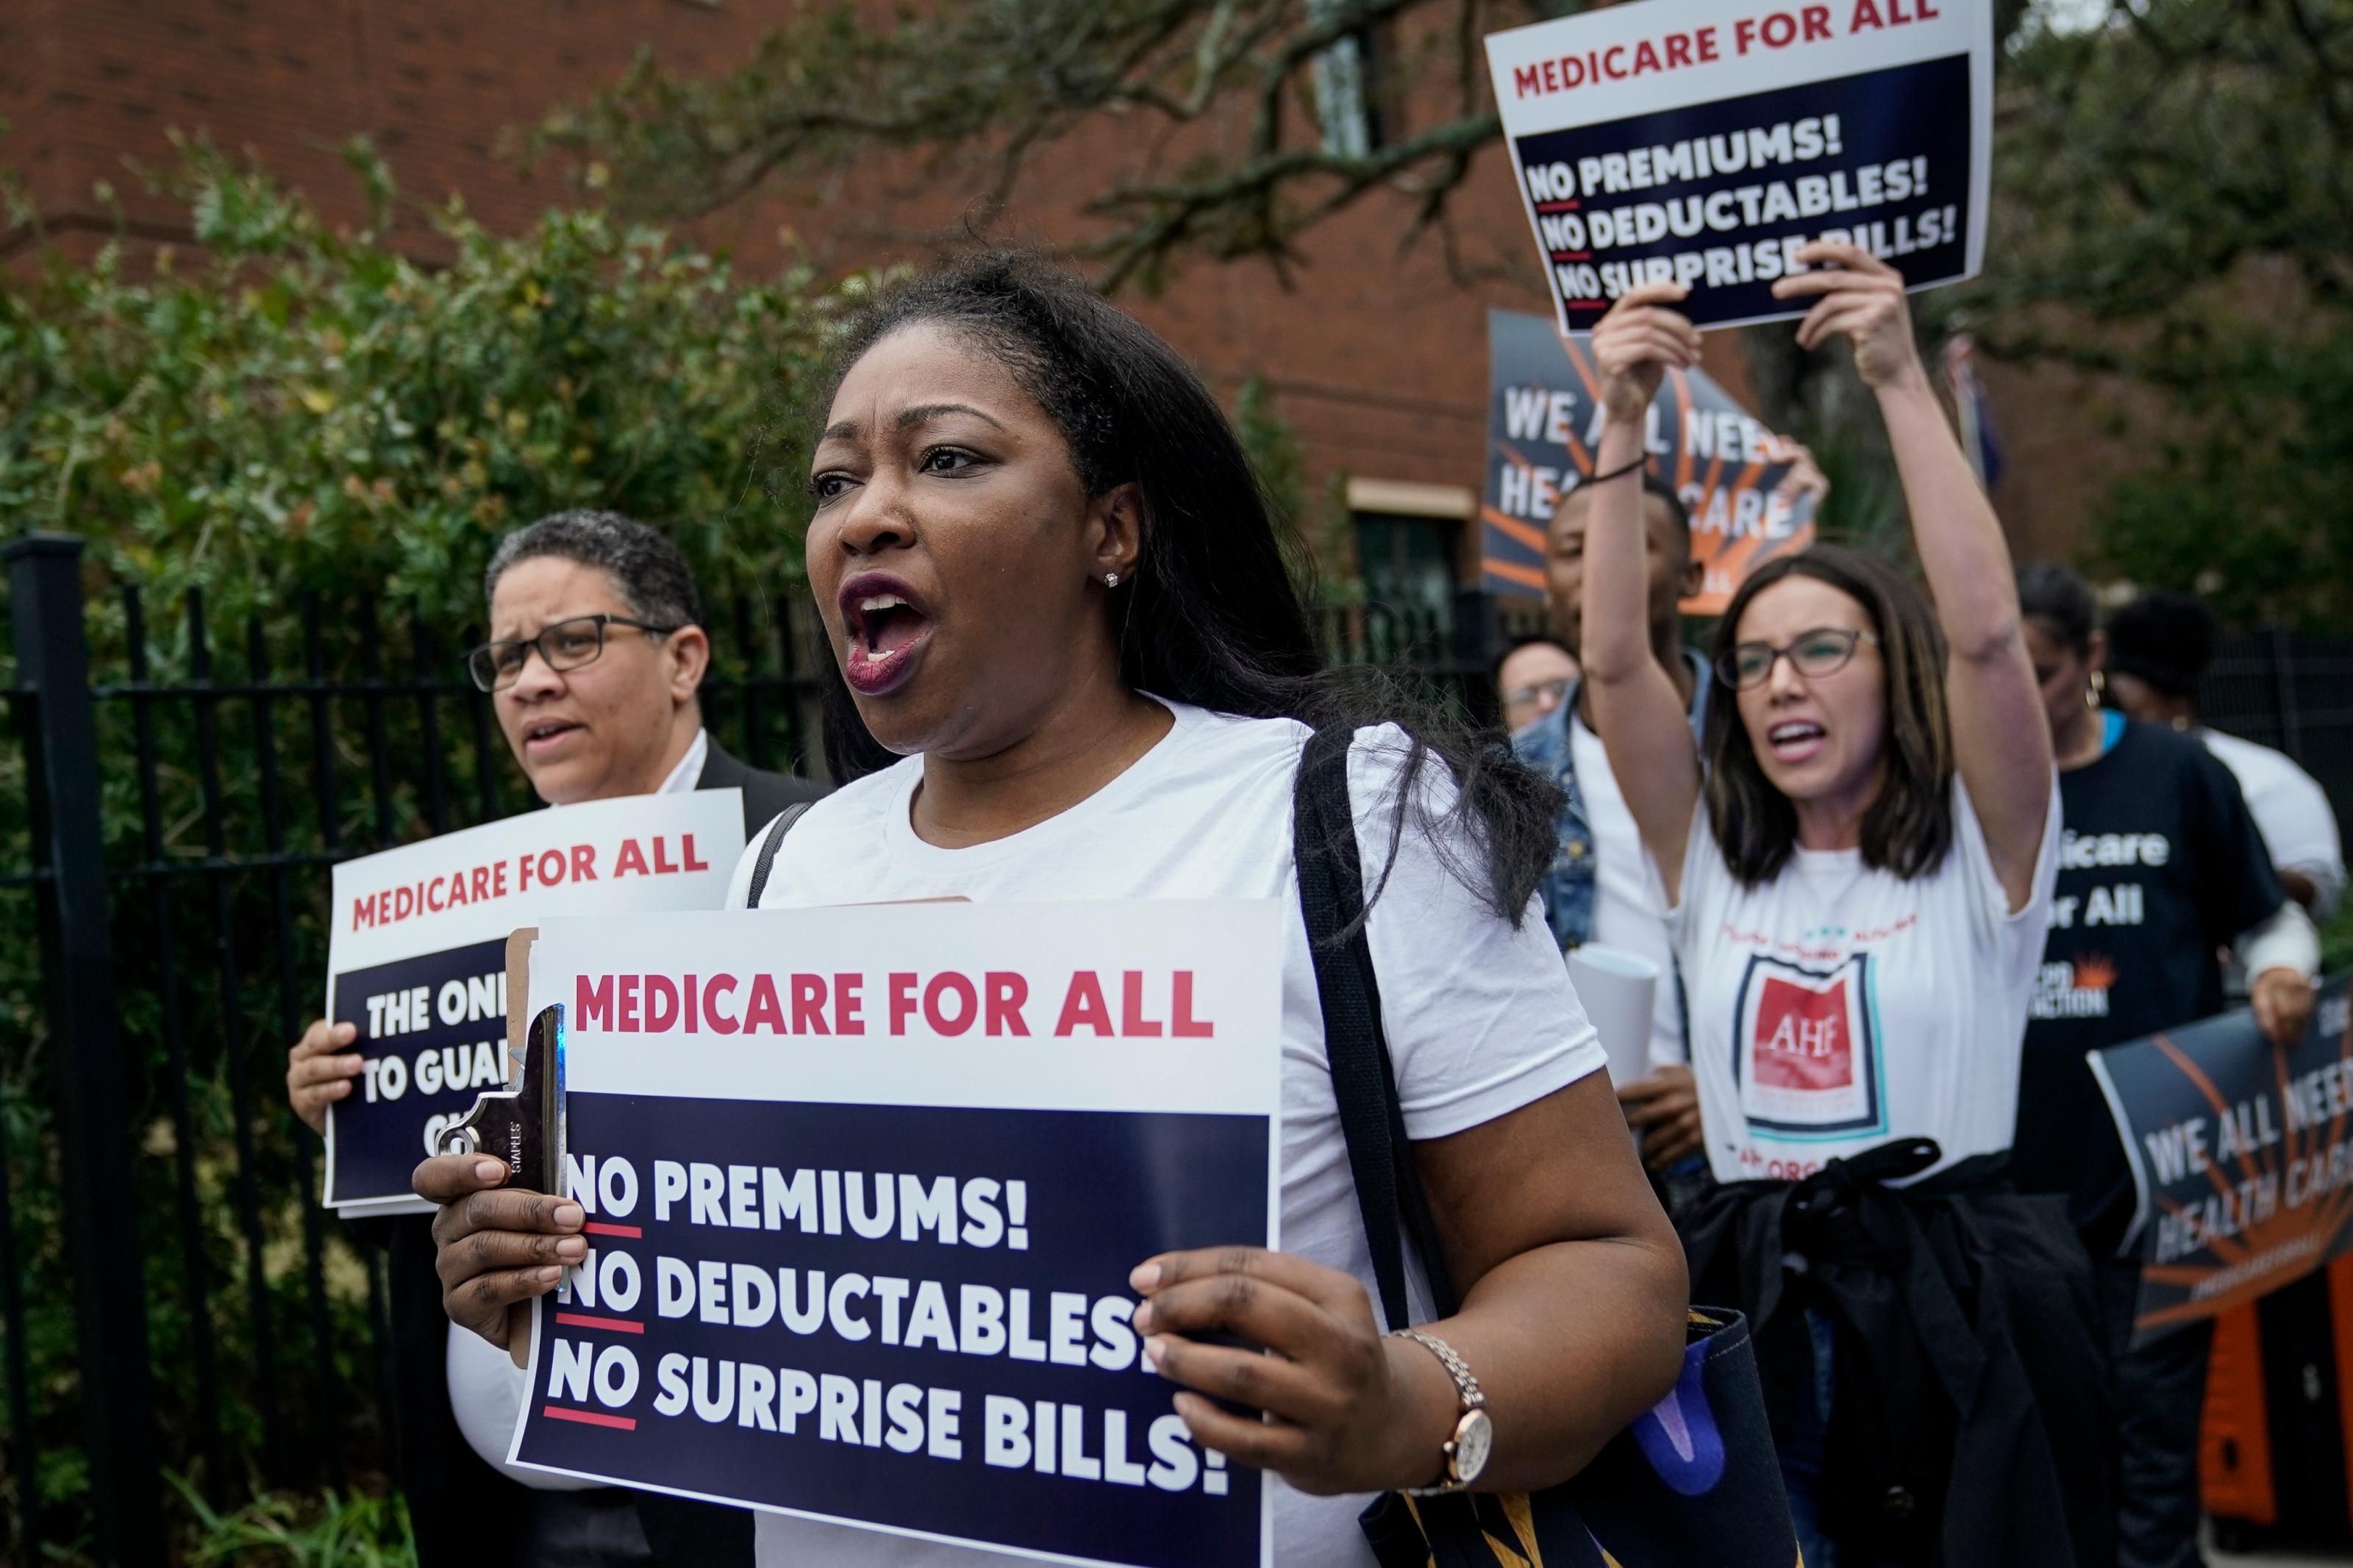 Medicare For All supporters demonstrate outside of the Charleston Gaillard Center ahead of the Democratic presidential debate on February 25, 2020 in Charleston, South Carolina. (Photo: Drew Angerer via Getty Images)